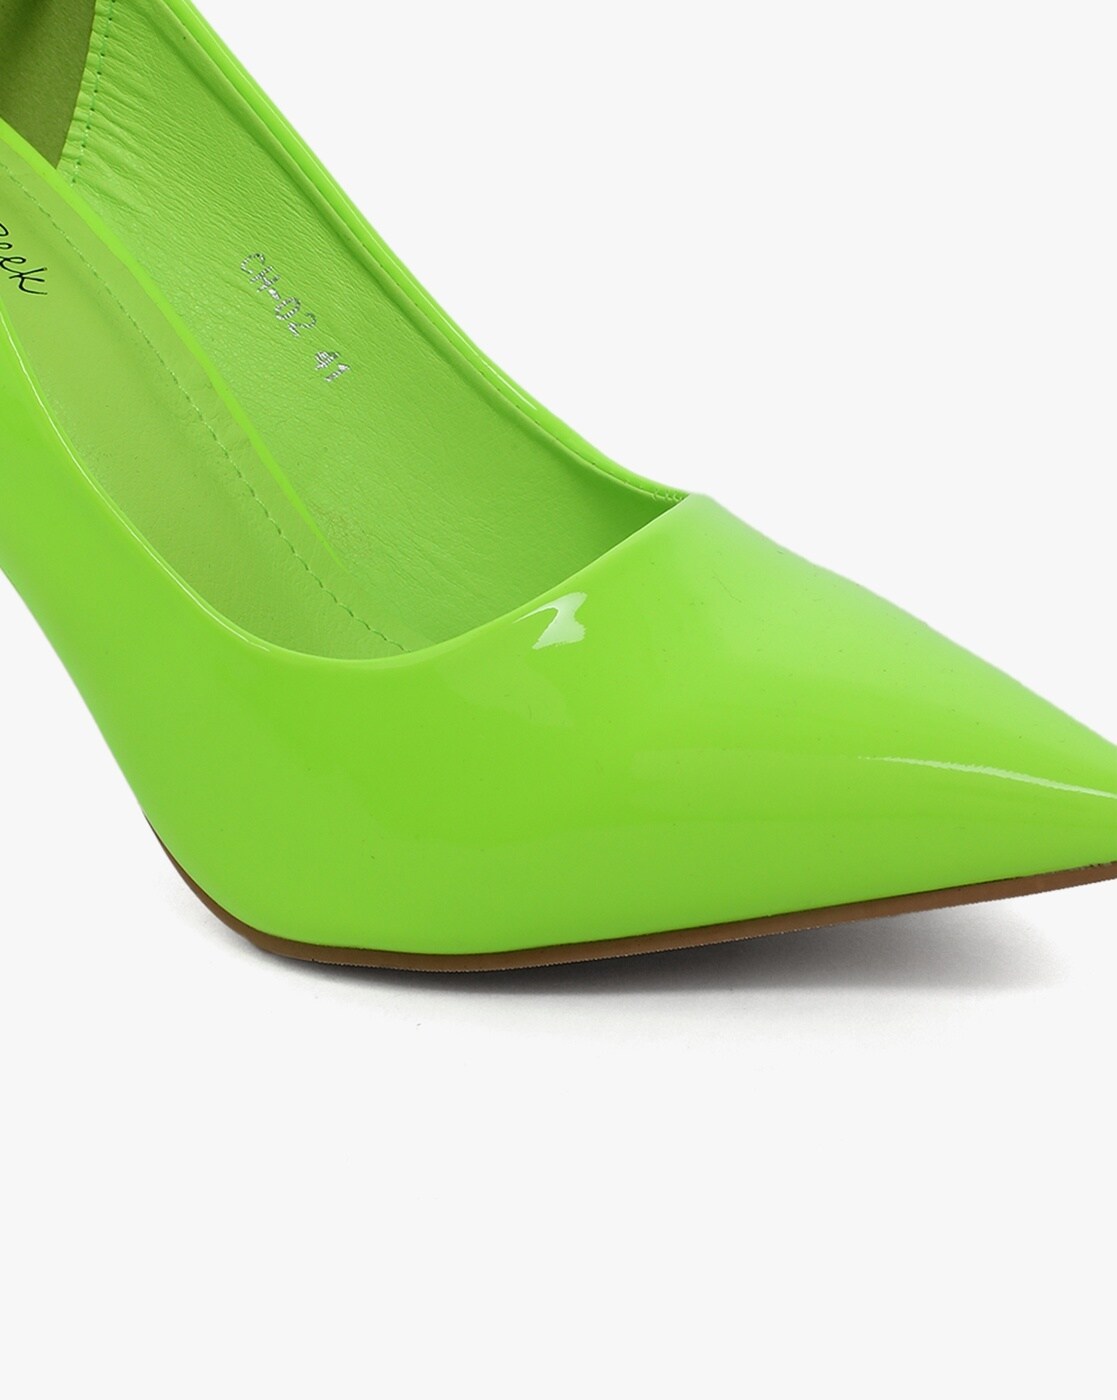 Neon Yellow Pumps - Pointed-Toe Pumps - Bright Yellow Heels - Lulus